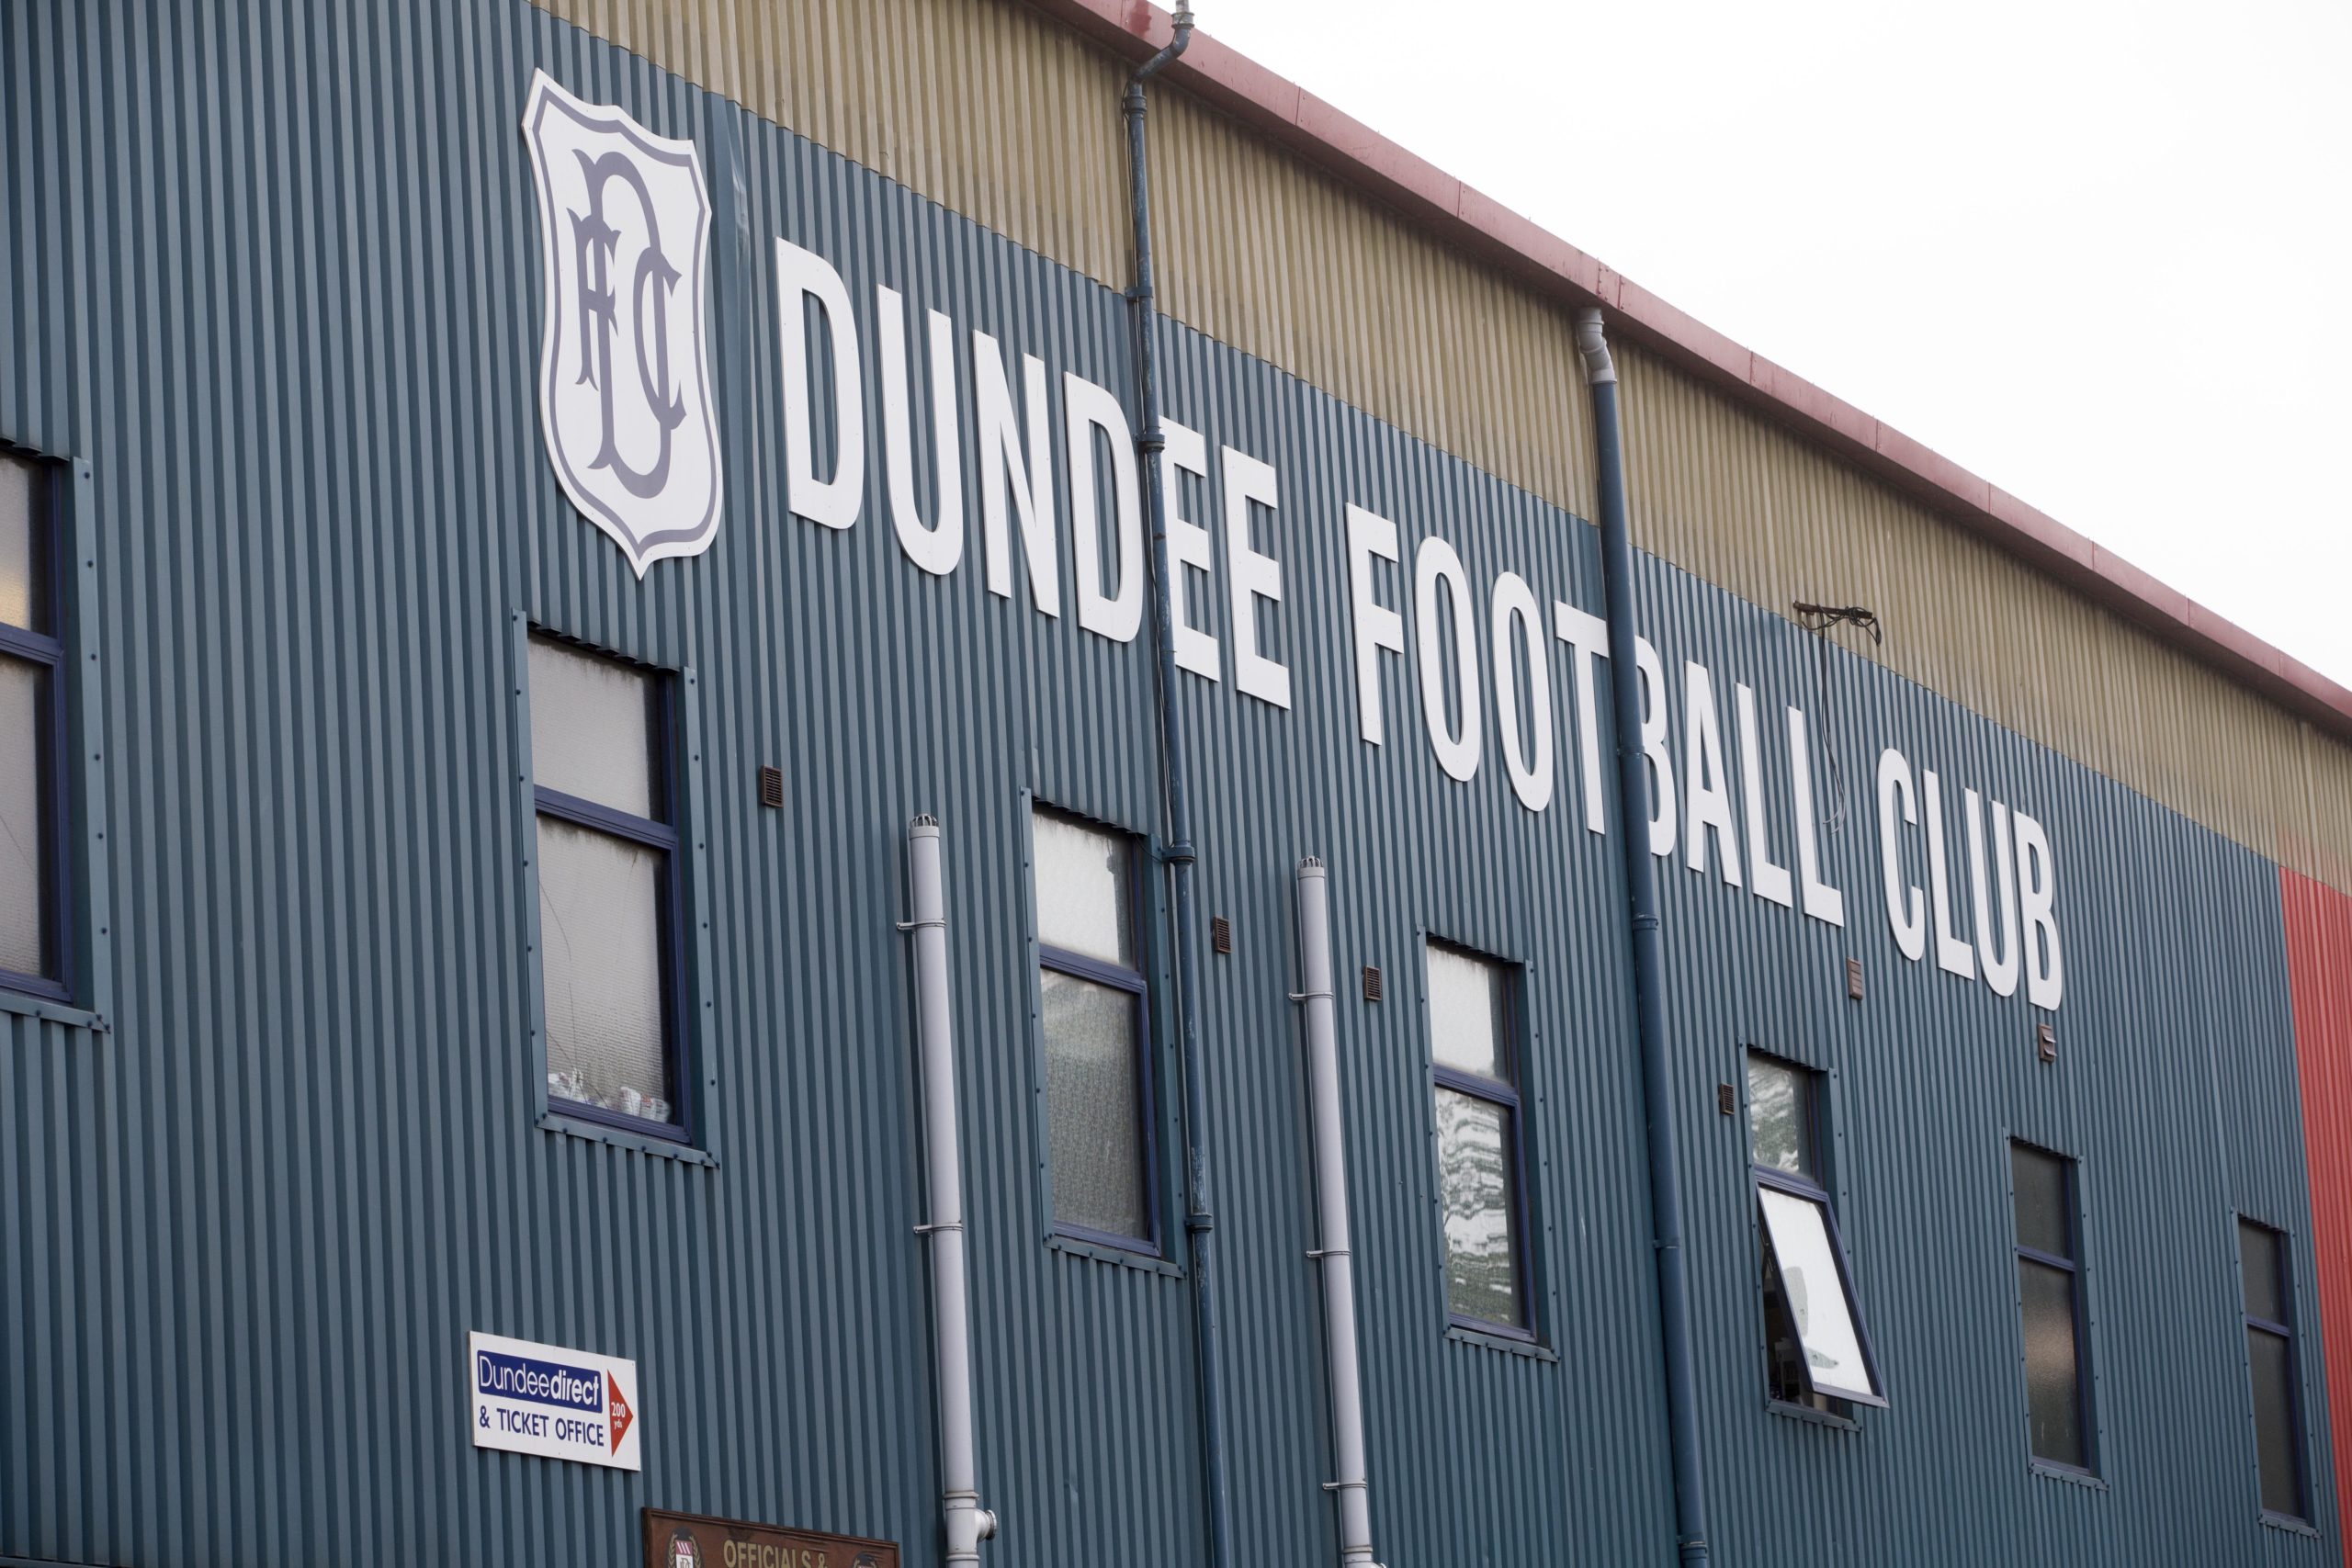 Dundee have done business with Celtic in the past